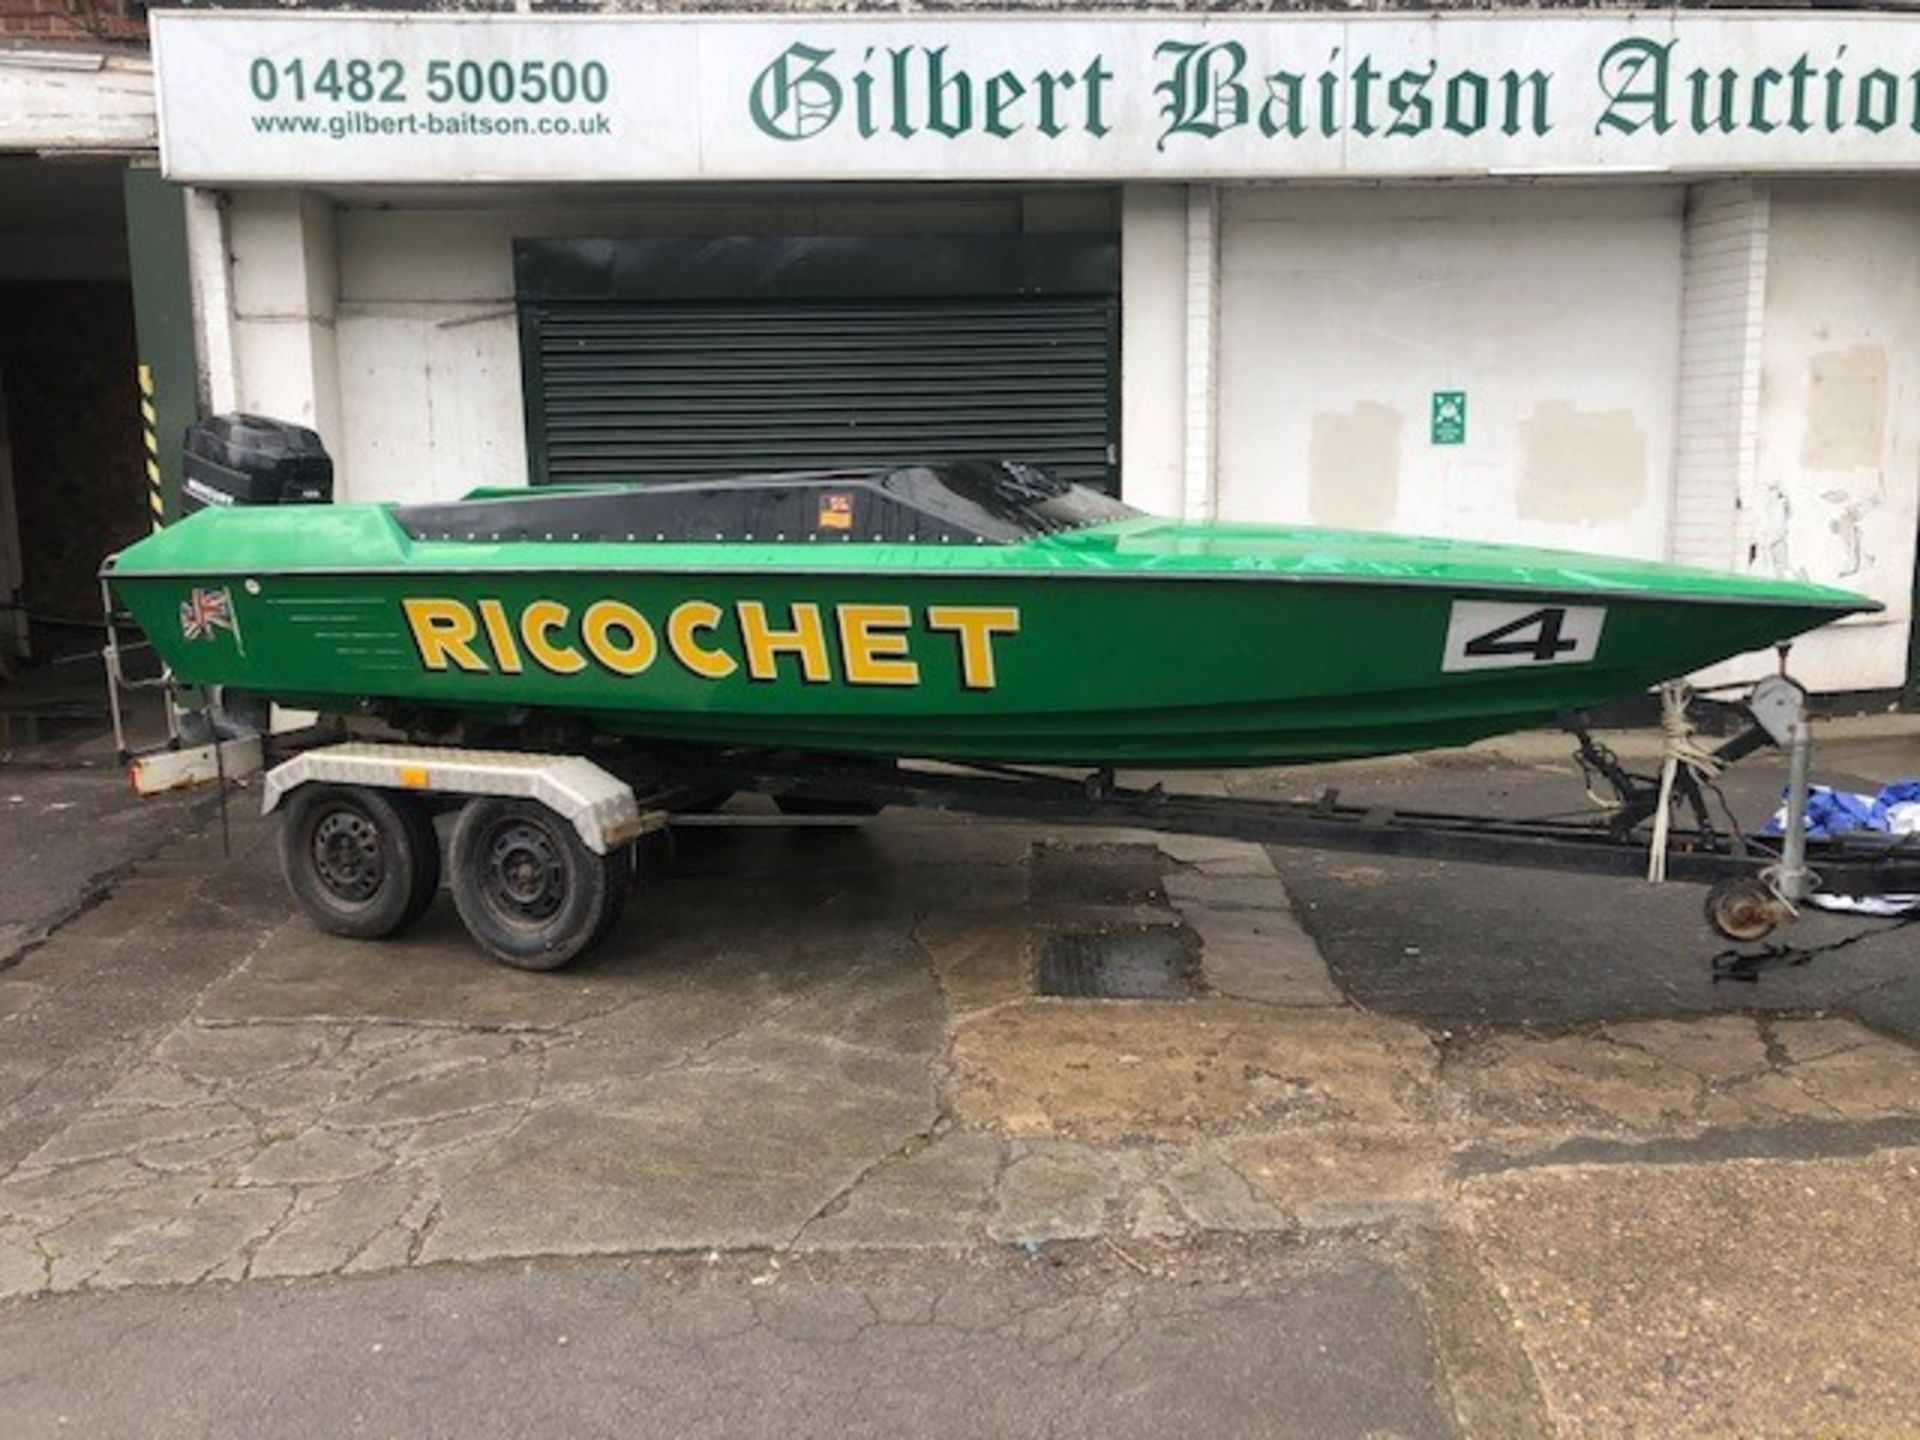 Ring 16ft Four Person Speedboat & Road Trailer A/F - Located in Romsey SO51 6AE - No 2 stroke Filler